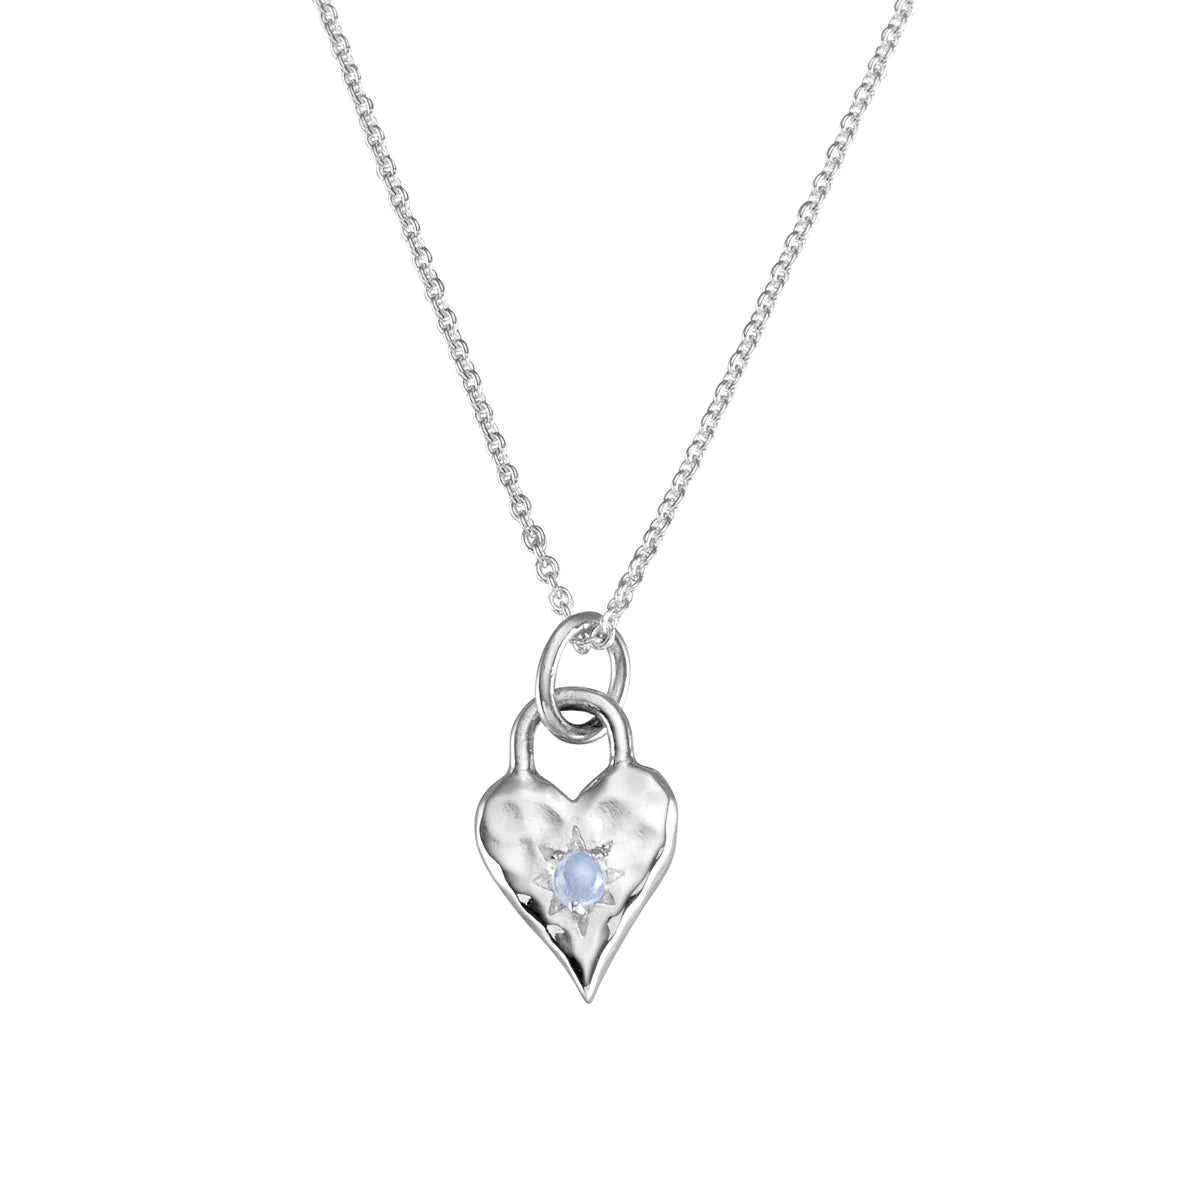 N633RM Love Heart Moonstone Necklace